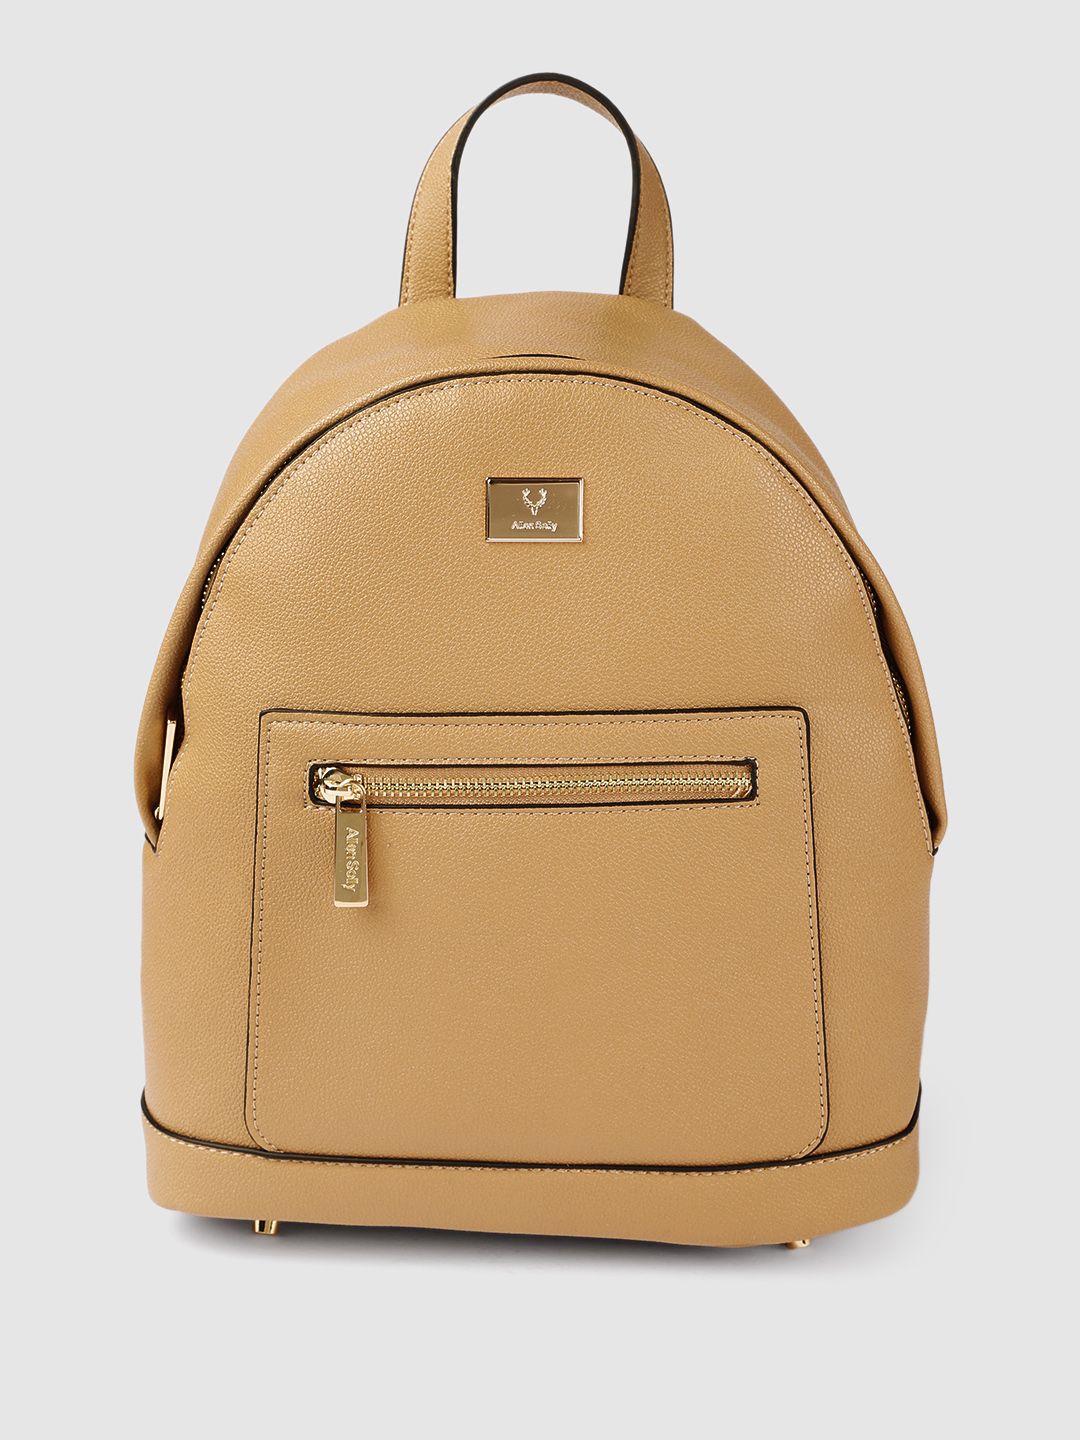 Allen Solly Women Tan Brown Solid Backpack Price in India